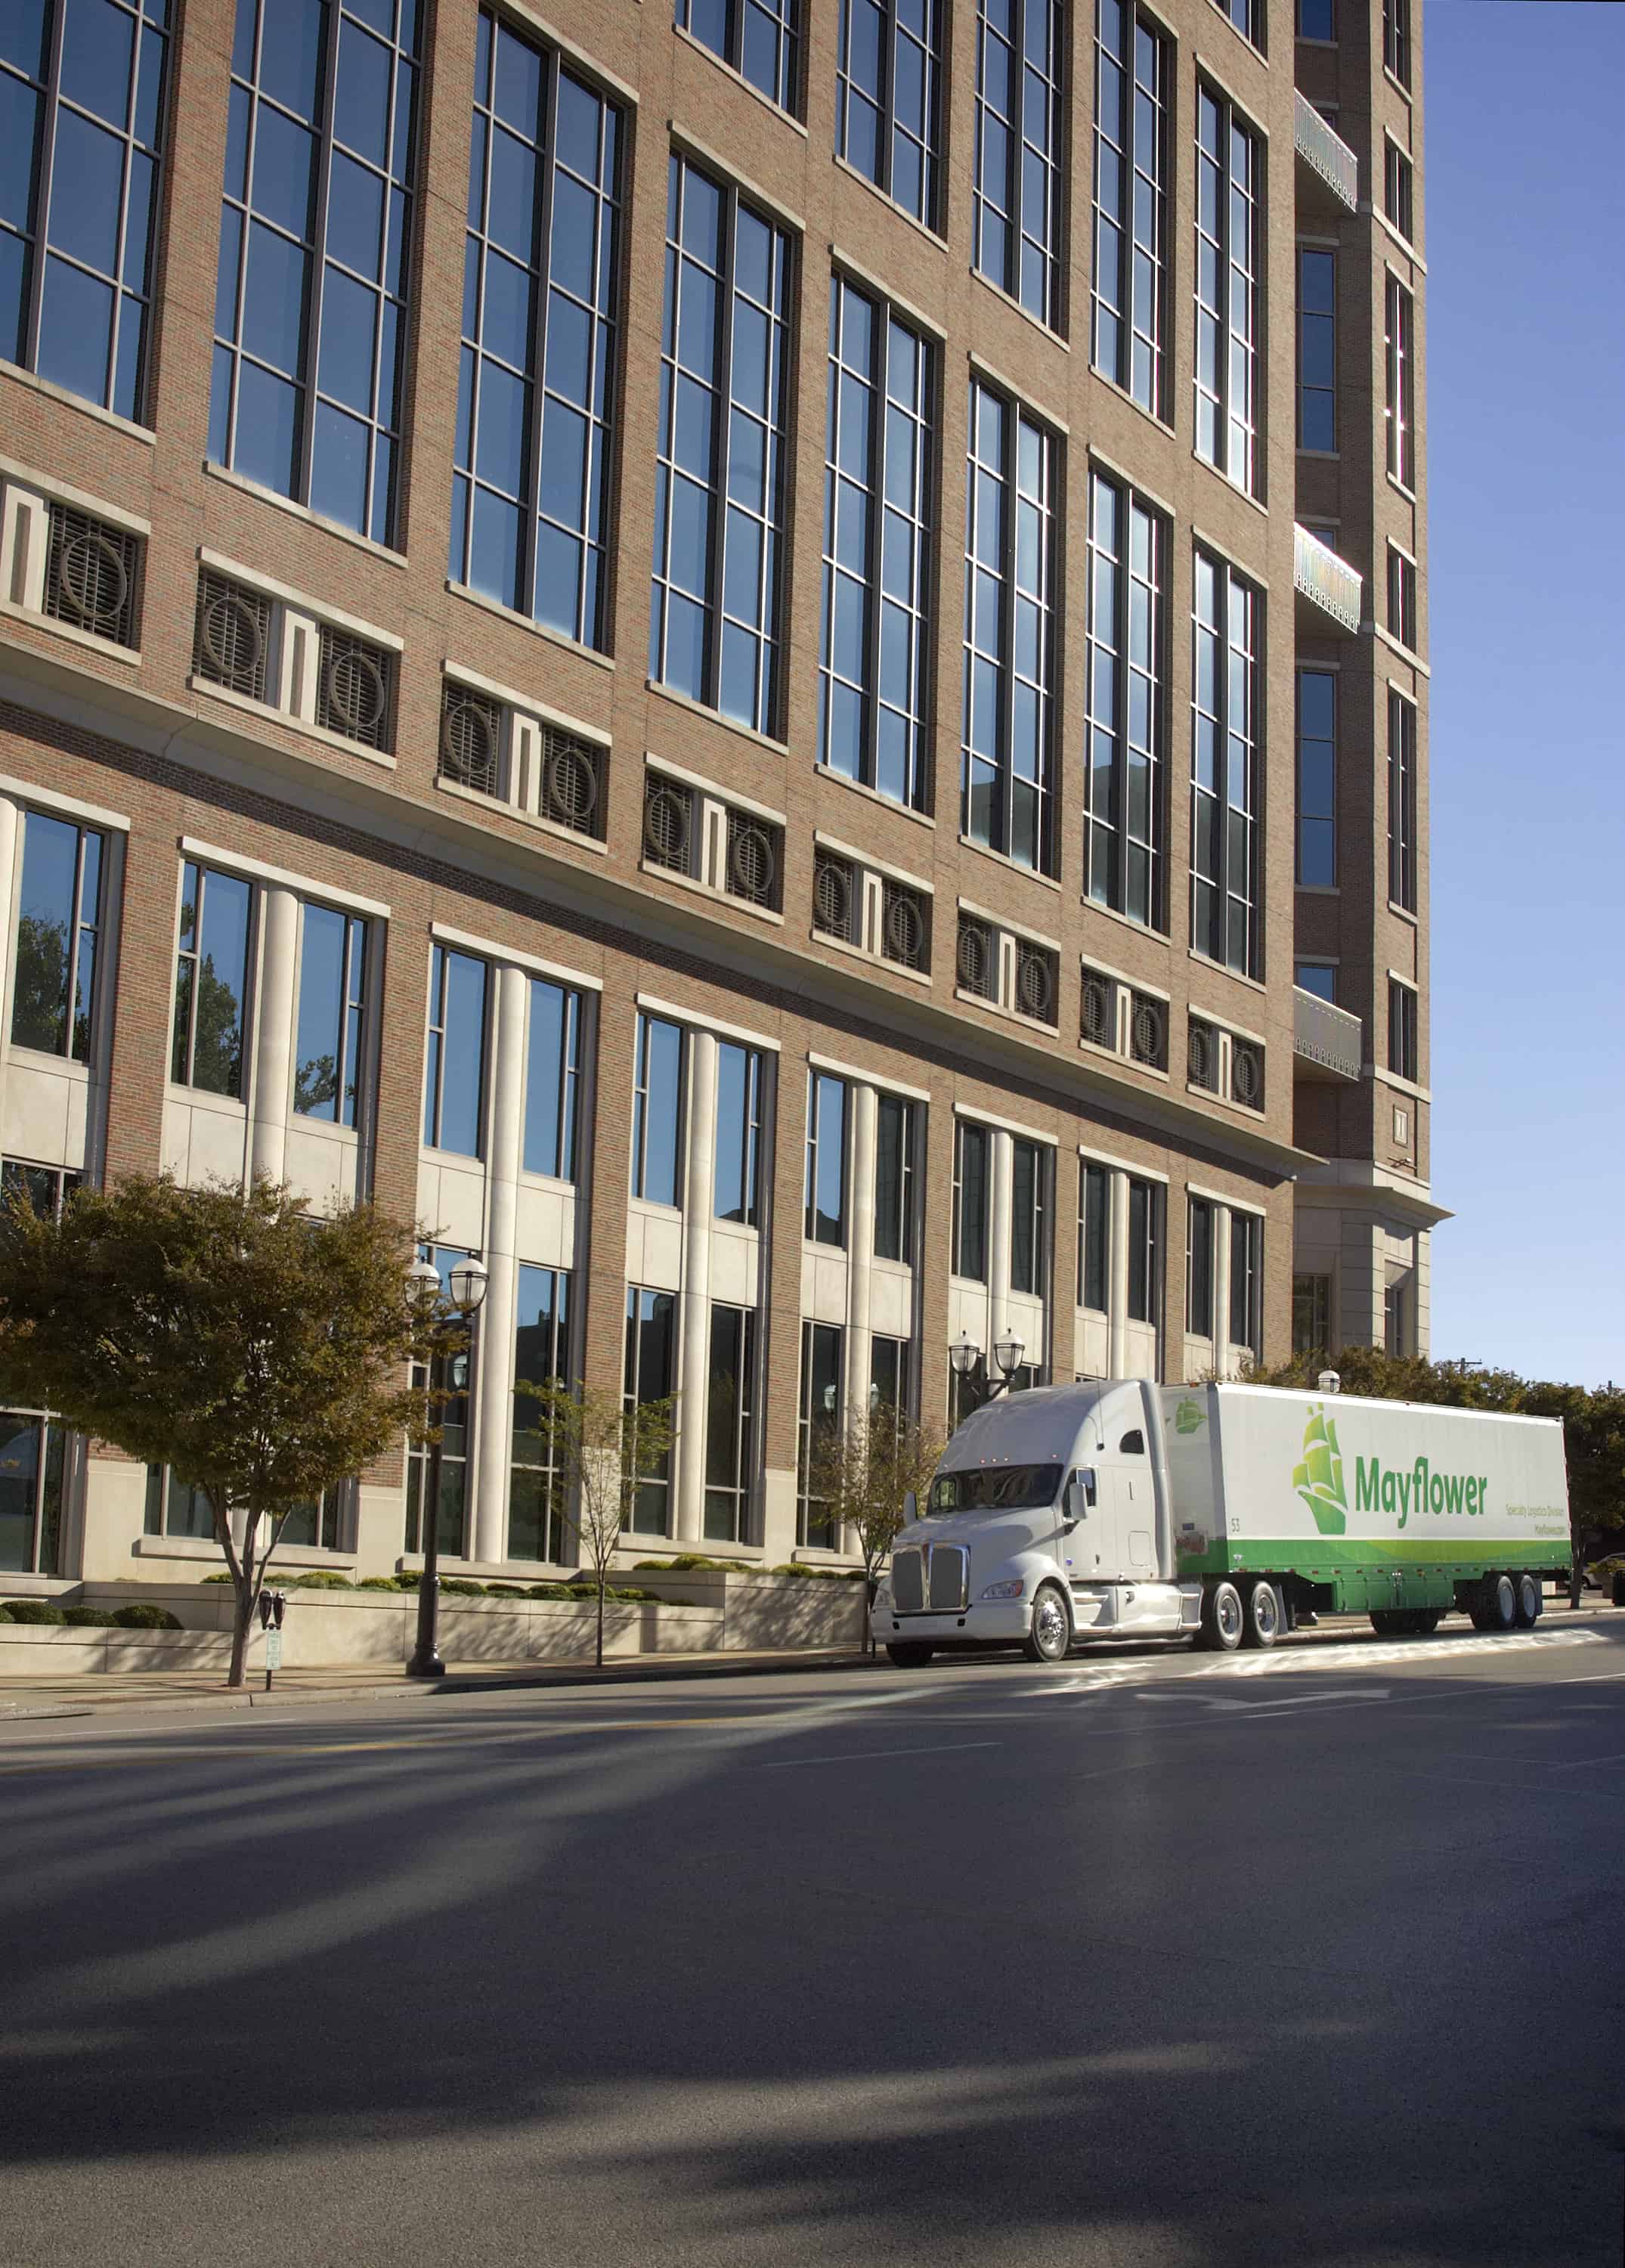 Mayflower long distance moving truck driving next to office buildings